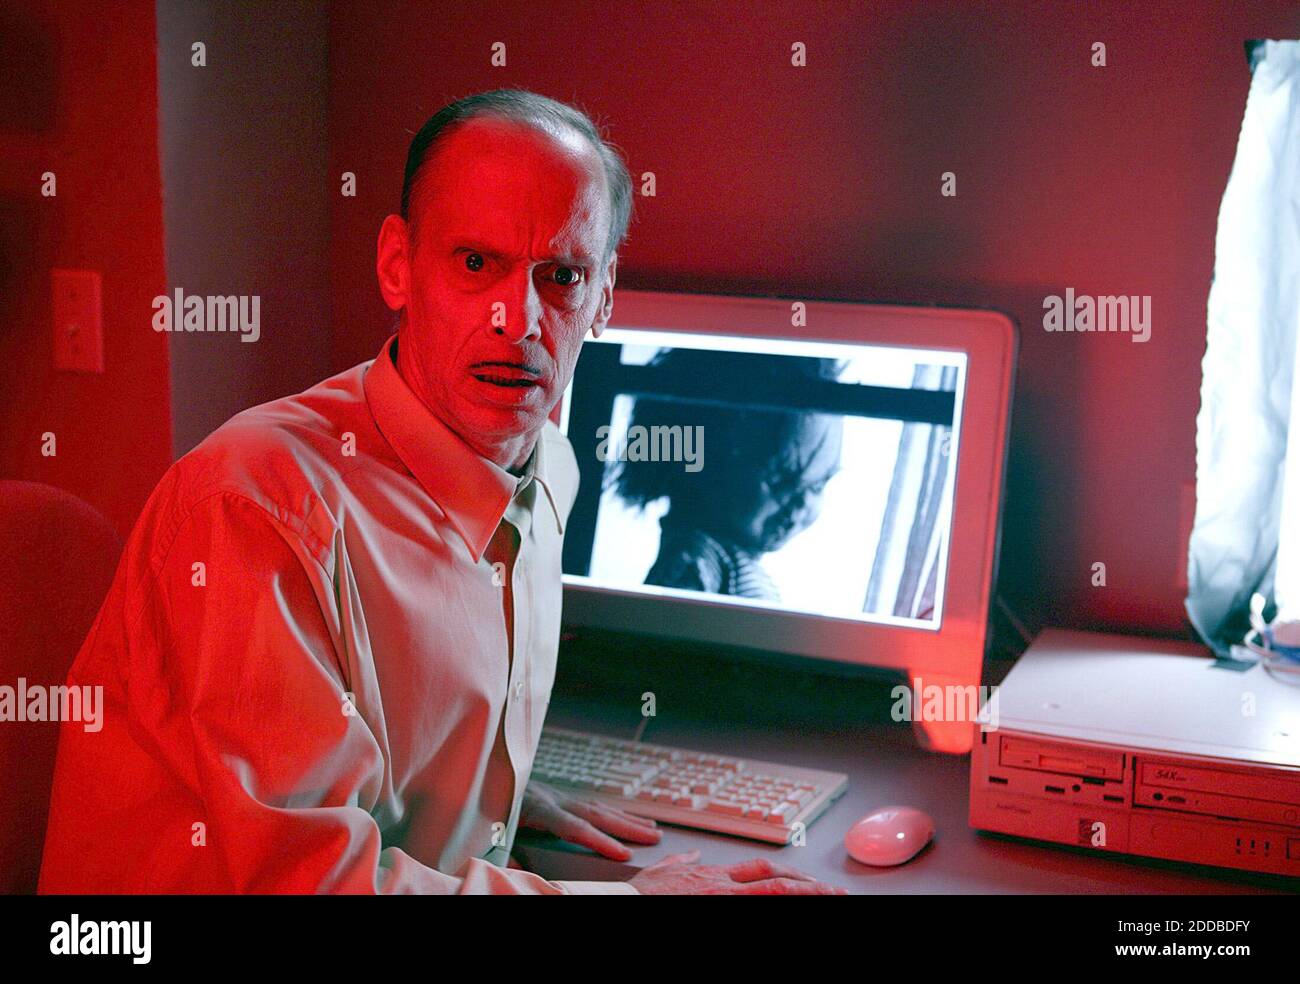 NO FILM, NO VIDEO, NO TV, NO DOCUMENTARY - John Waters stars in -Seed of Chucky.- Photo by Rolf Konow/Rogue pictures/KRT/ABACA. Stock Photo